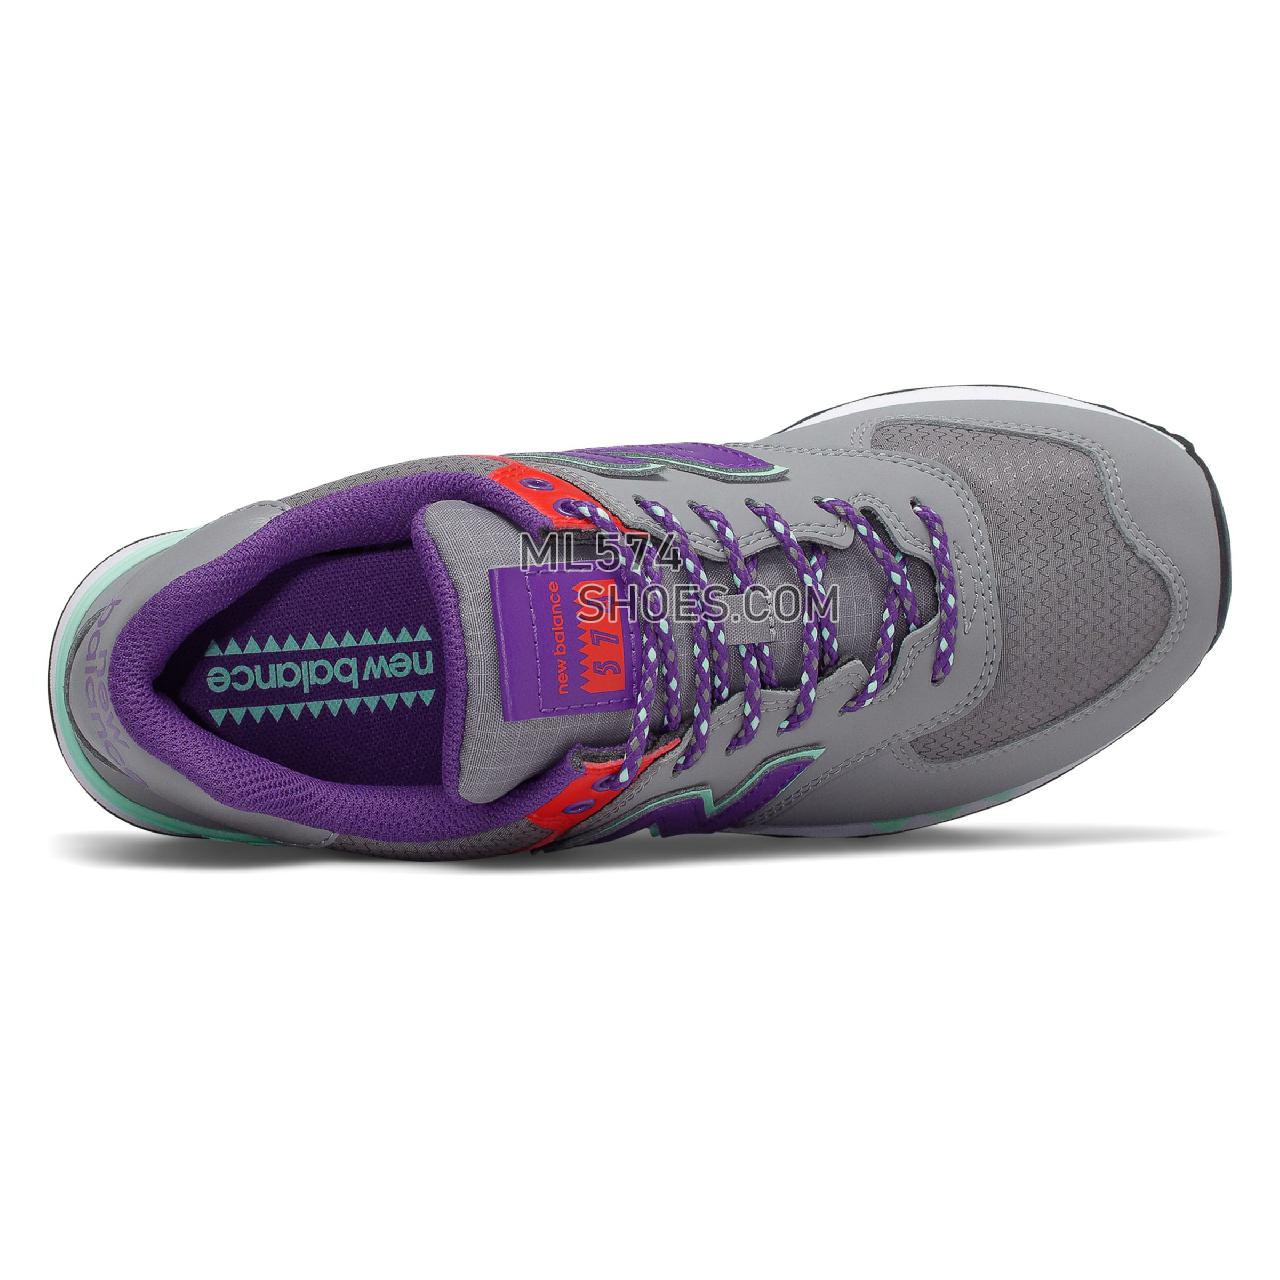 New Balance 574 - Women's Classic Sneakers - Marblehead with Prism Purple - WL574WOA